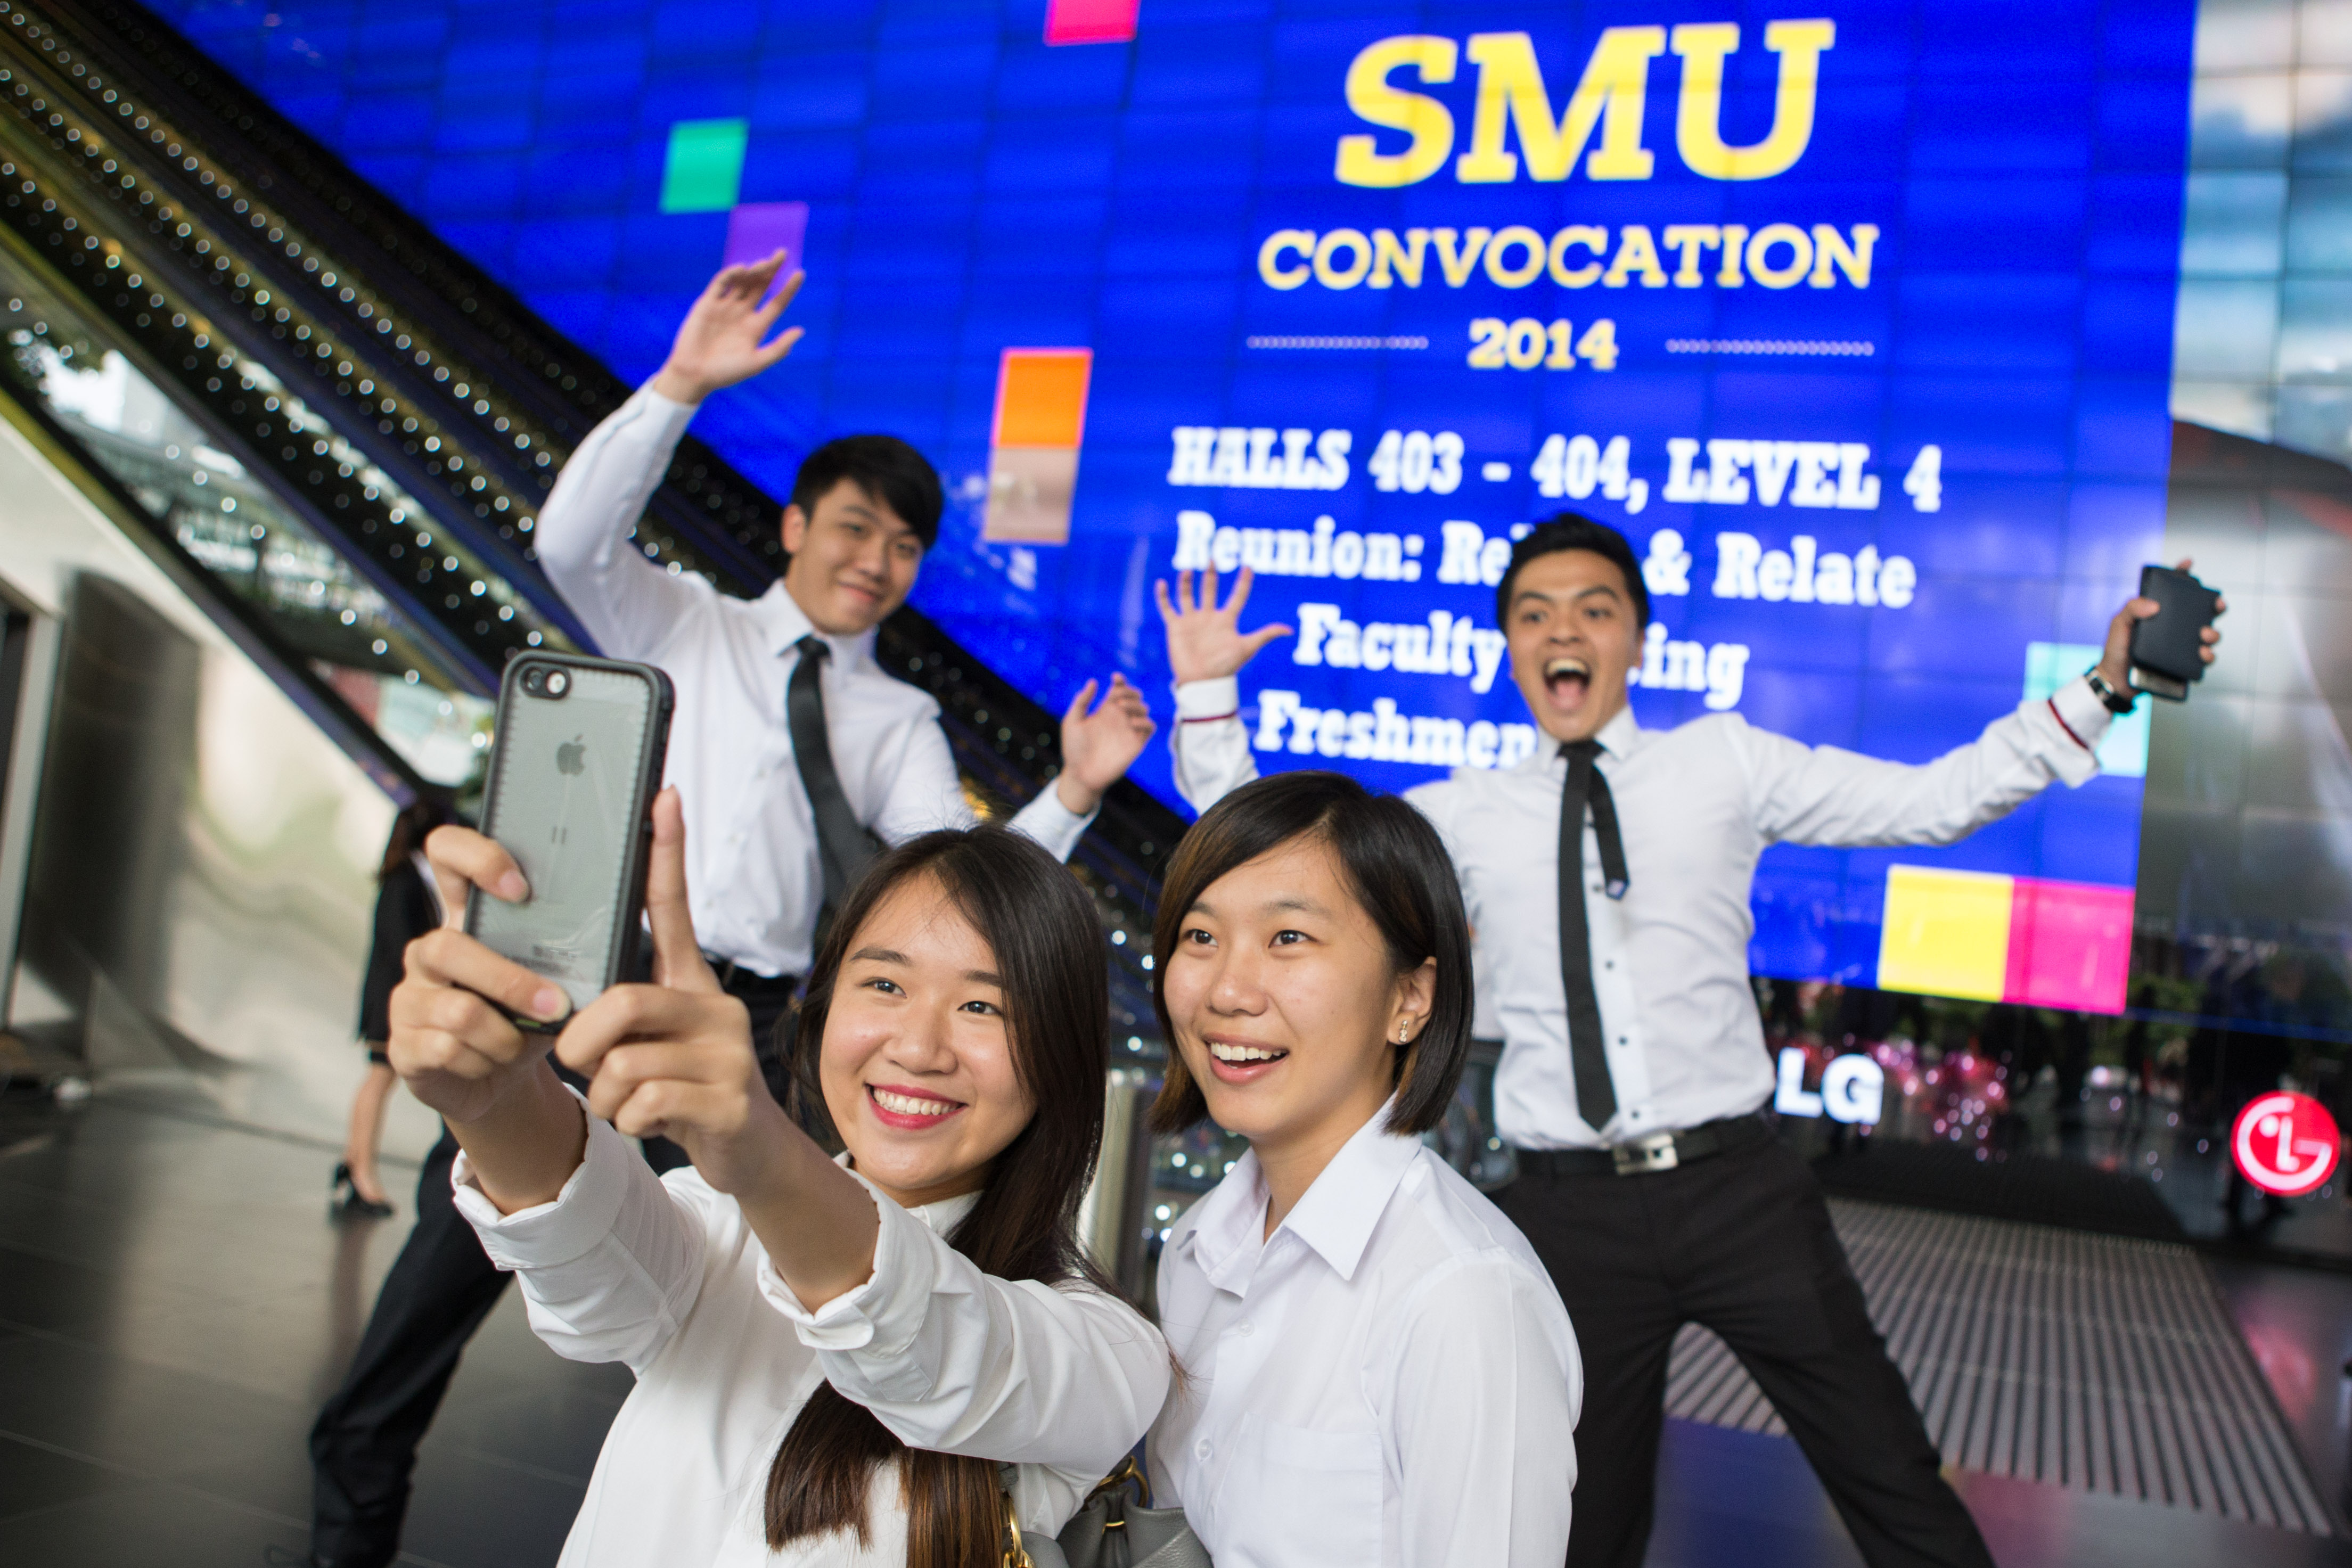 SMU Convocation 2014: Students taking a selfie at Suntec Convention Centre